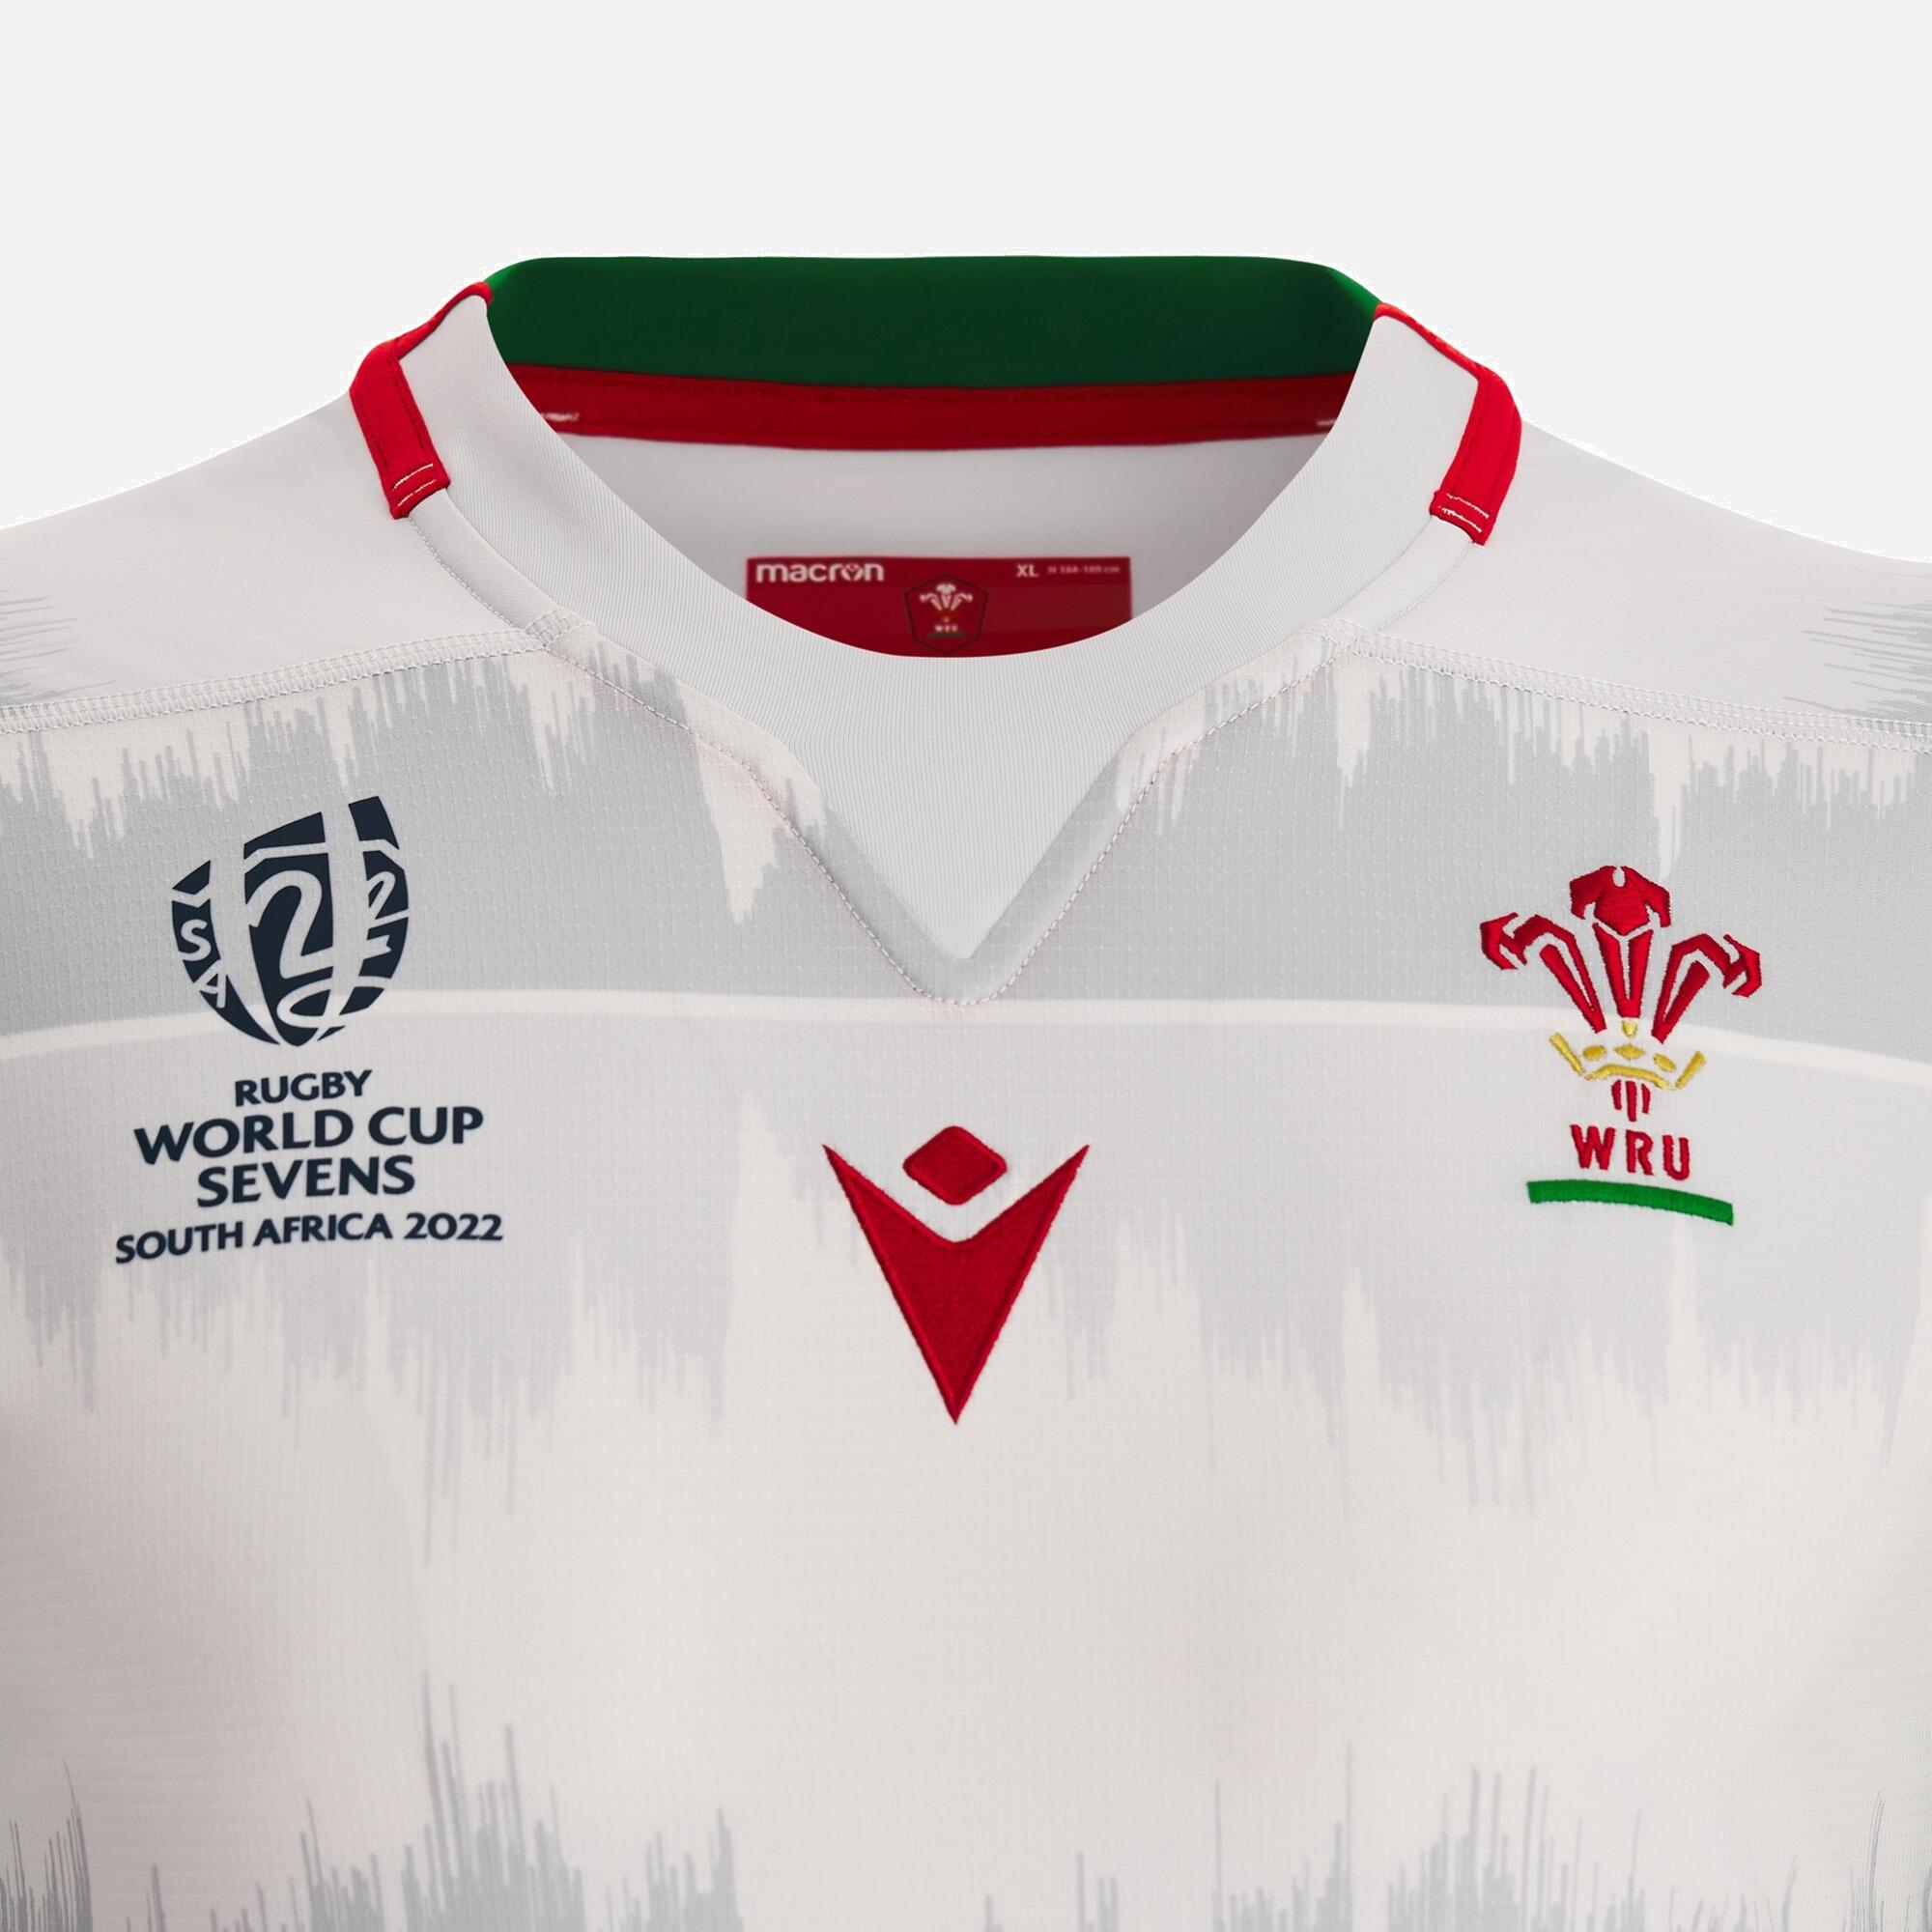 Macron Wales WRU 22/23 Away 7s Rugby World Cup Mens Technical Rugby Shirt 4/4